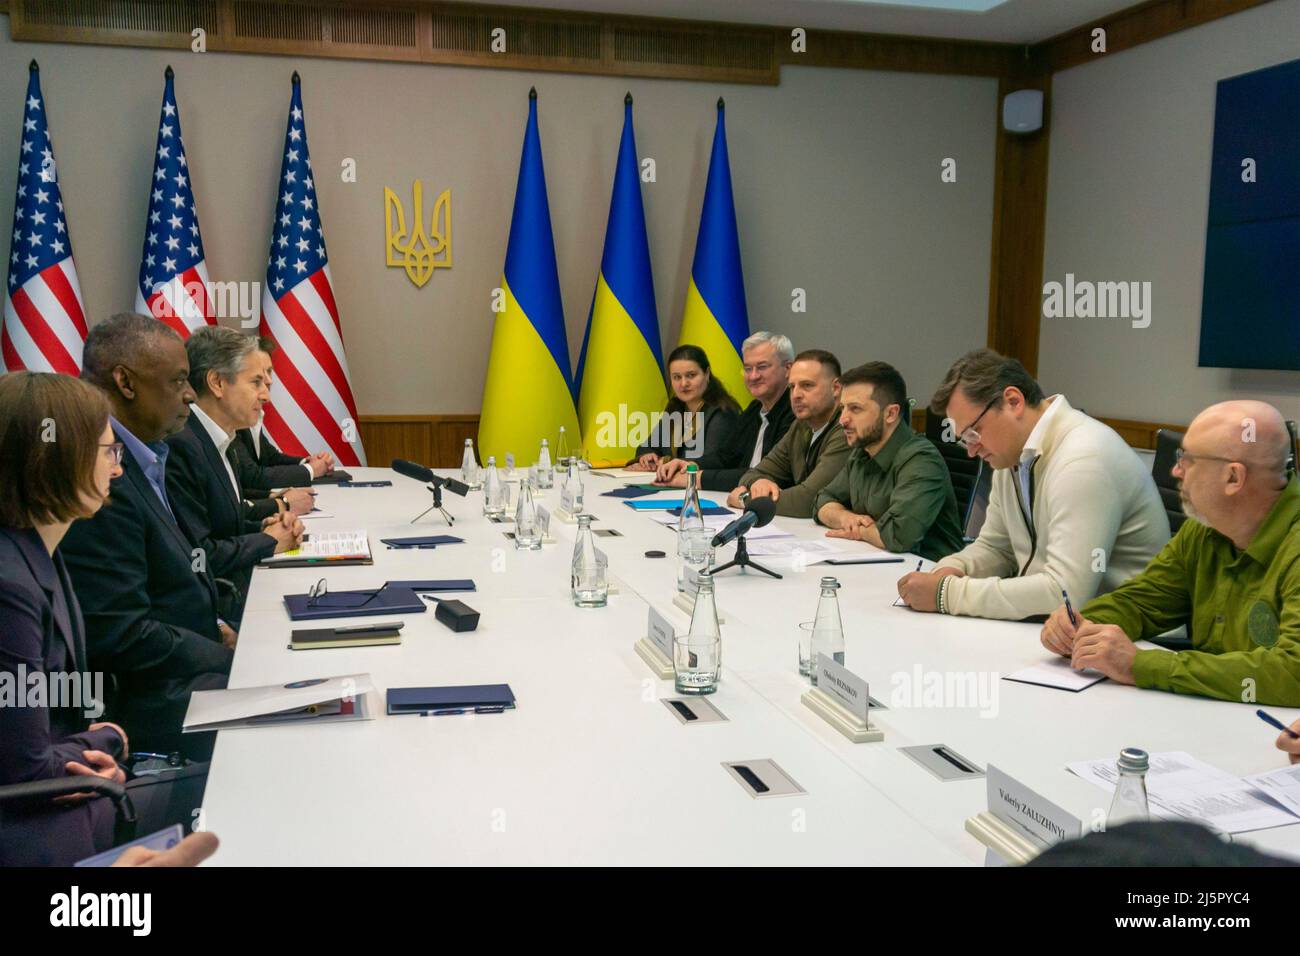 Kyiv, Ukraine. 24th Apr, 2022. Ukrainian President Volodymyr Zelenskyy, right, hosts a face-to-face meeting with U.S. Secretary of State Tony Blinken and U.S. Secretary of Defense Lloyd Austin, left, April 24, 2022 in Kyiv, Ukraine. Austin and Blinken are the highest ranking U.S. officials to visit Kyiv since the Russian invasion. Credit: U.S. State Department/U.S. State Department/Alamy Live News Stock Photo